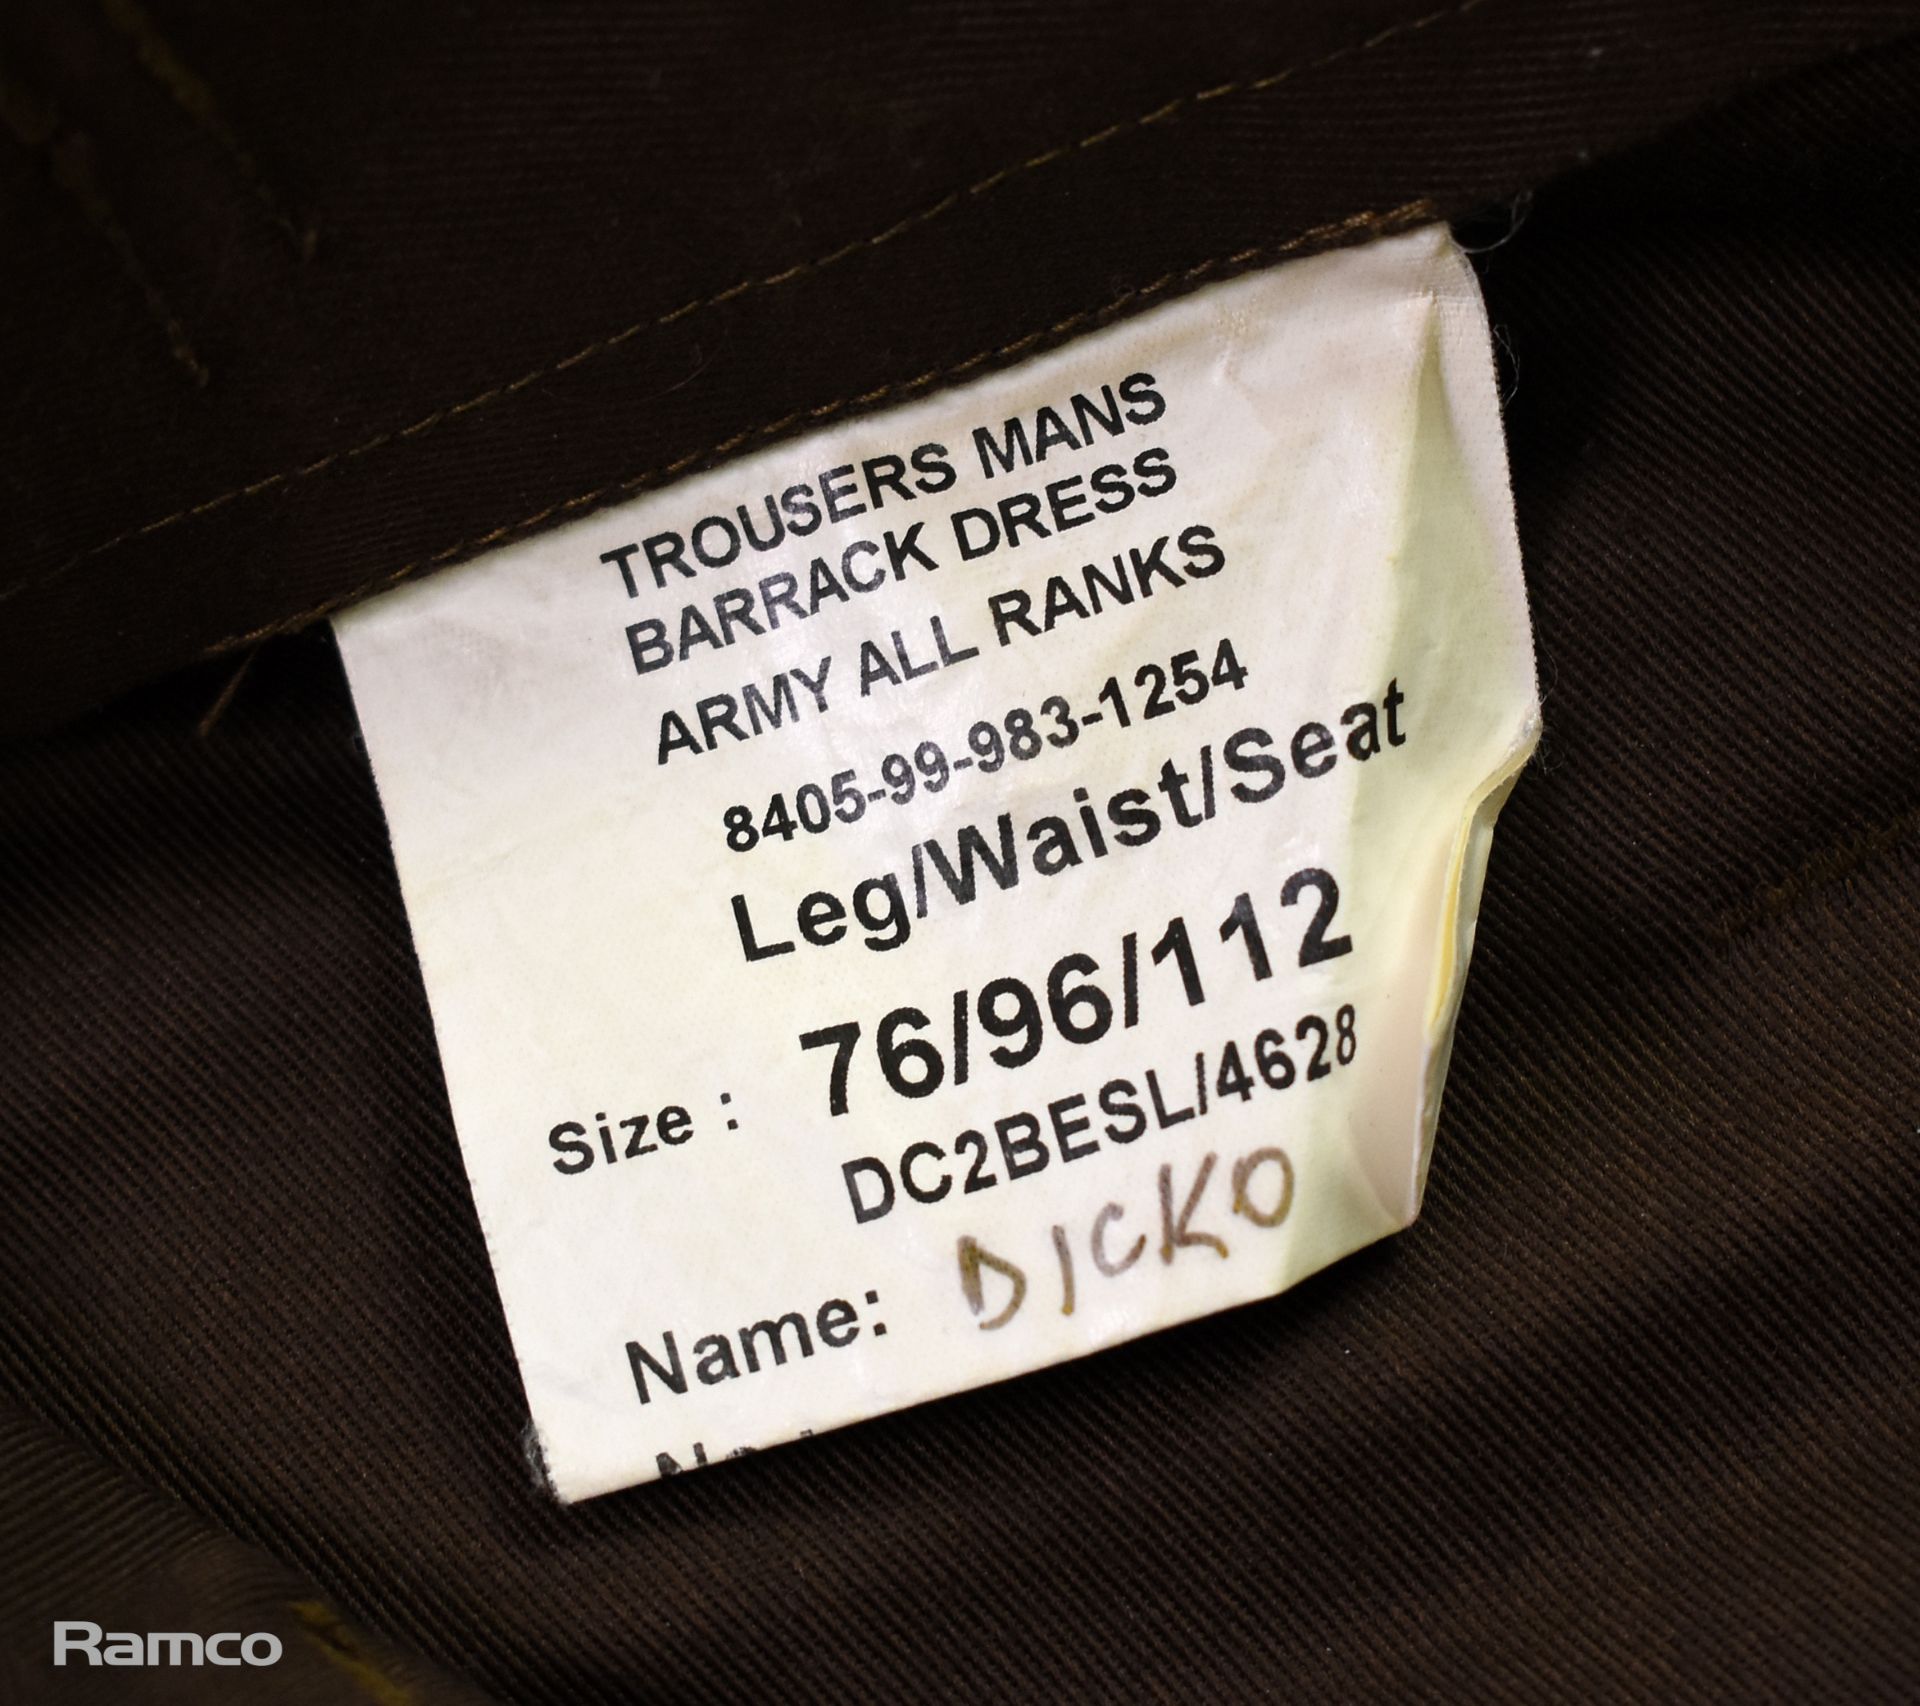 50x British Army No. 2 Dress trousers - mixed grades and sizes - Image 5 of 11